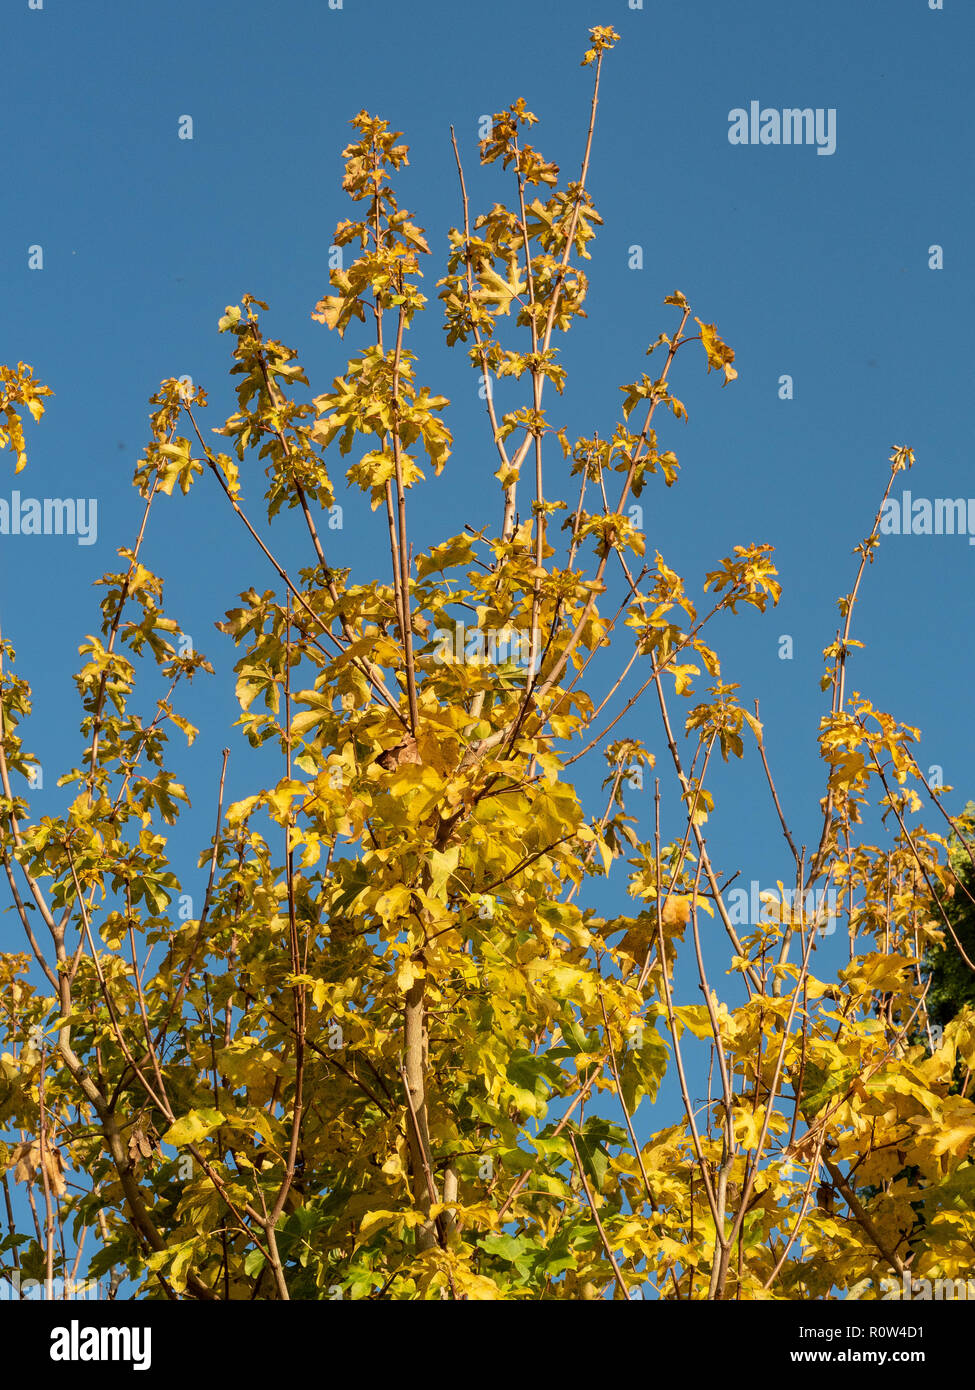 The golden foliage of the field maple Acer campestre glowing in the autumn sunlight against a clear blue sky Stock Photo